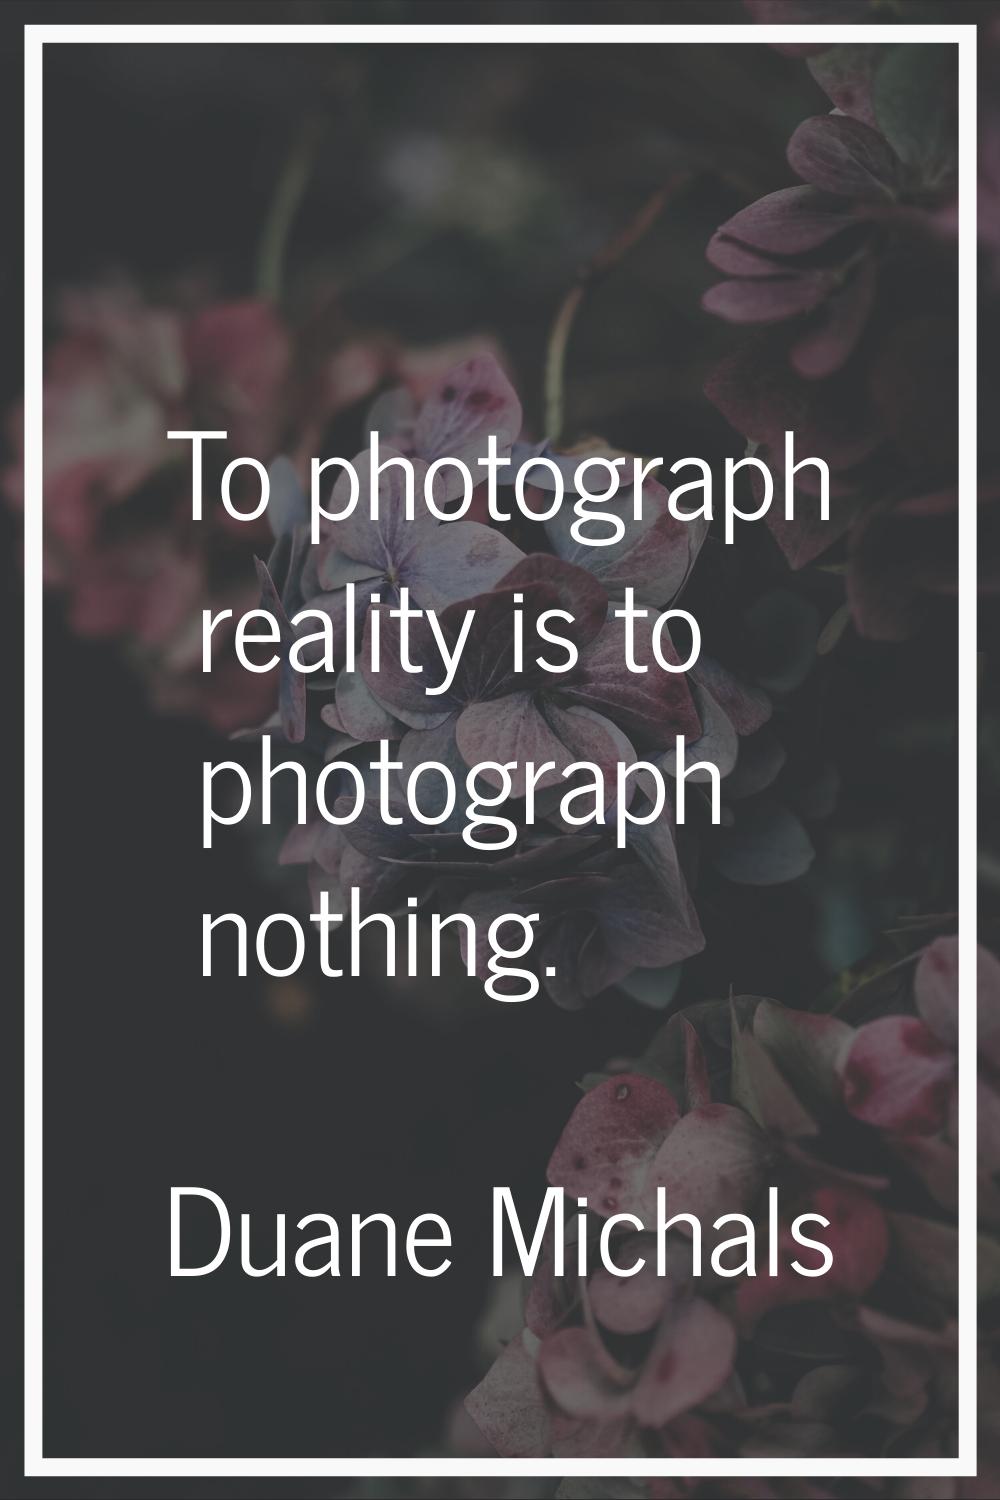 To photograph reality is to photograph nothing.